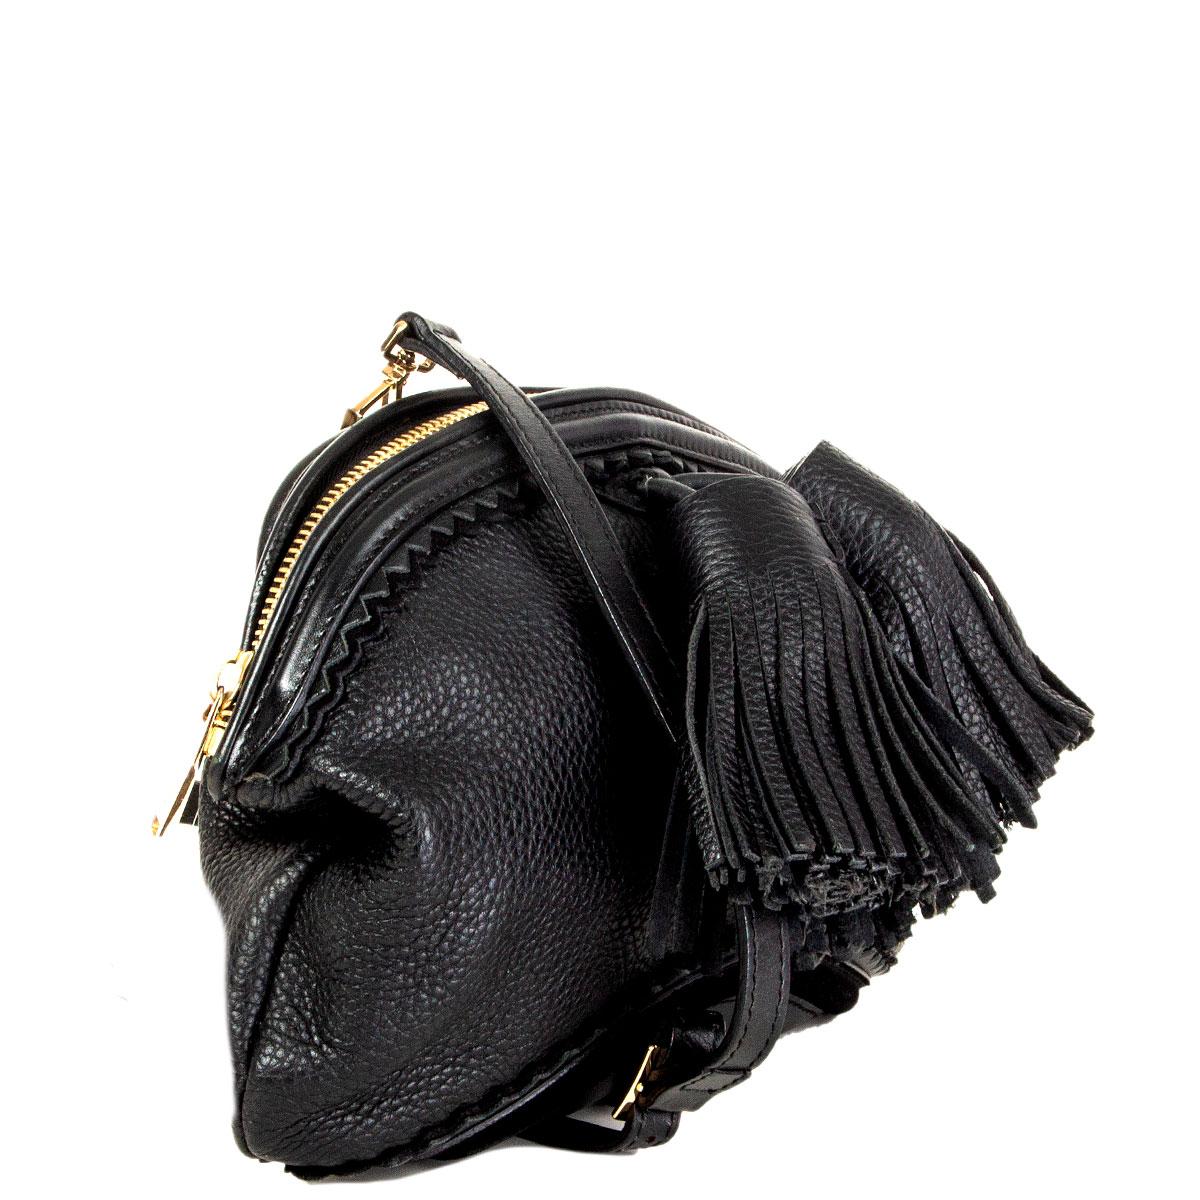 100% authentic Burberry Prorsum Wilbur crossbody bag in black grained calfskin with suede piping and two big tassels at front. Opens with a zipper on top and is lined in black nylon with one zipper pocket against the back and two open pockets